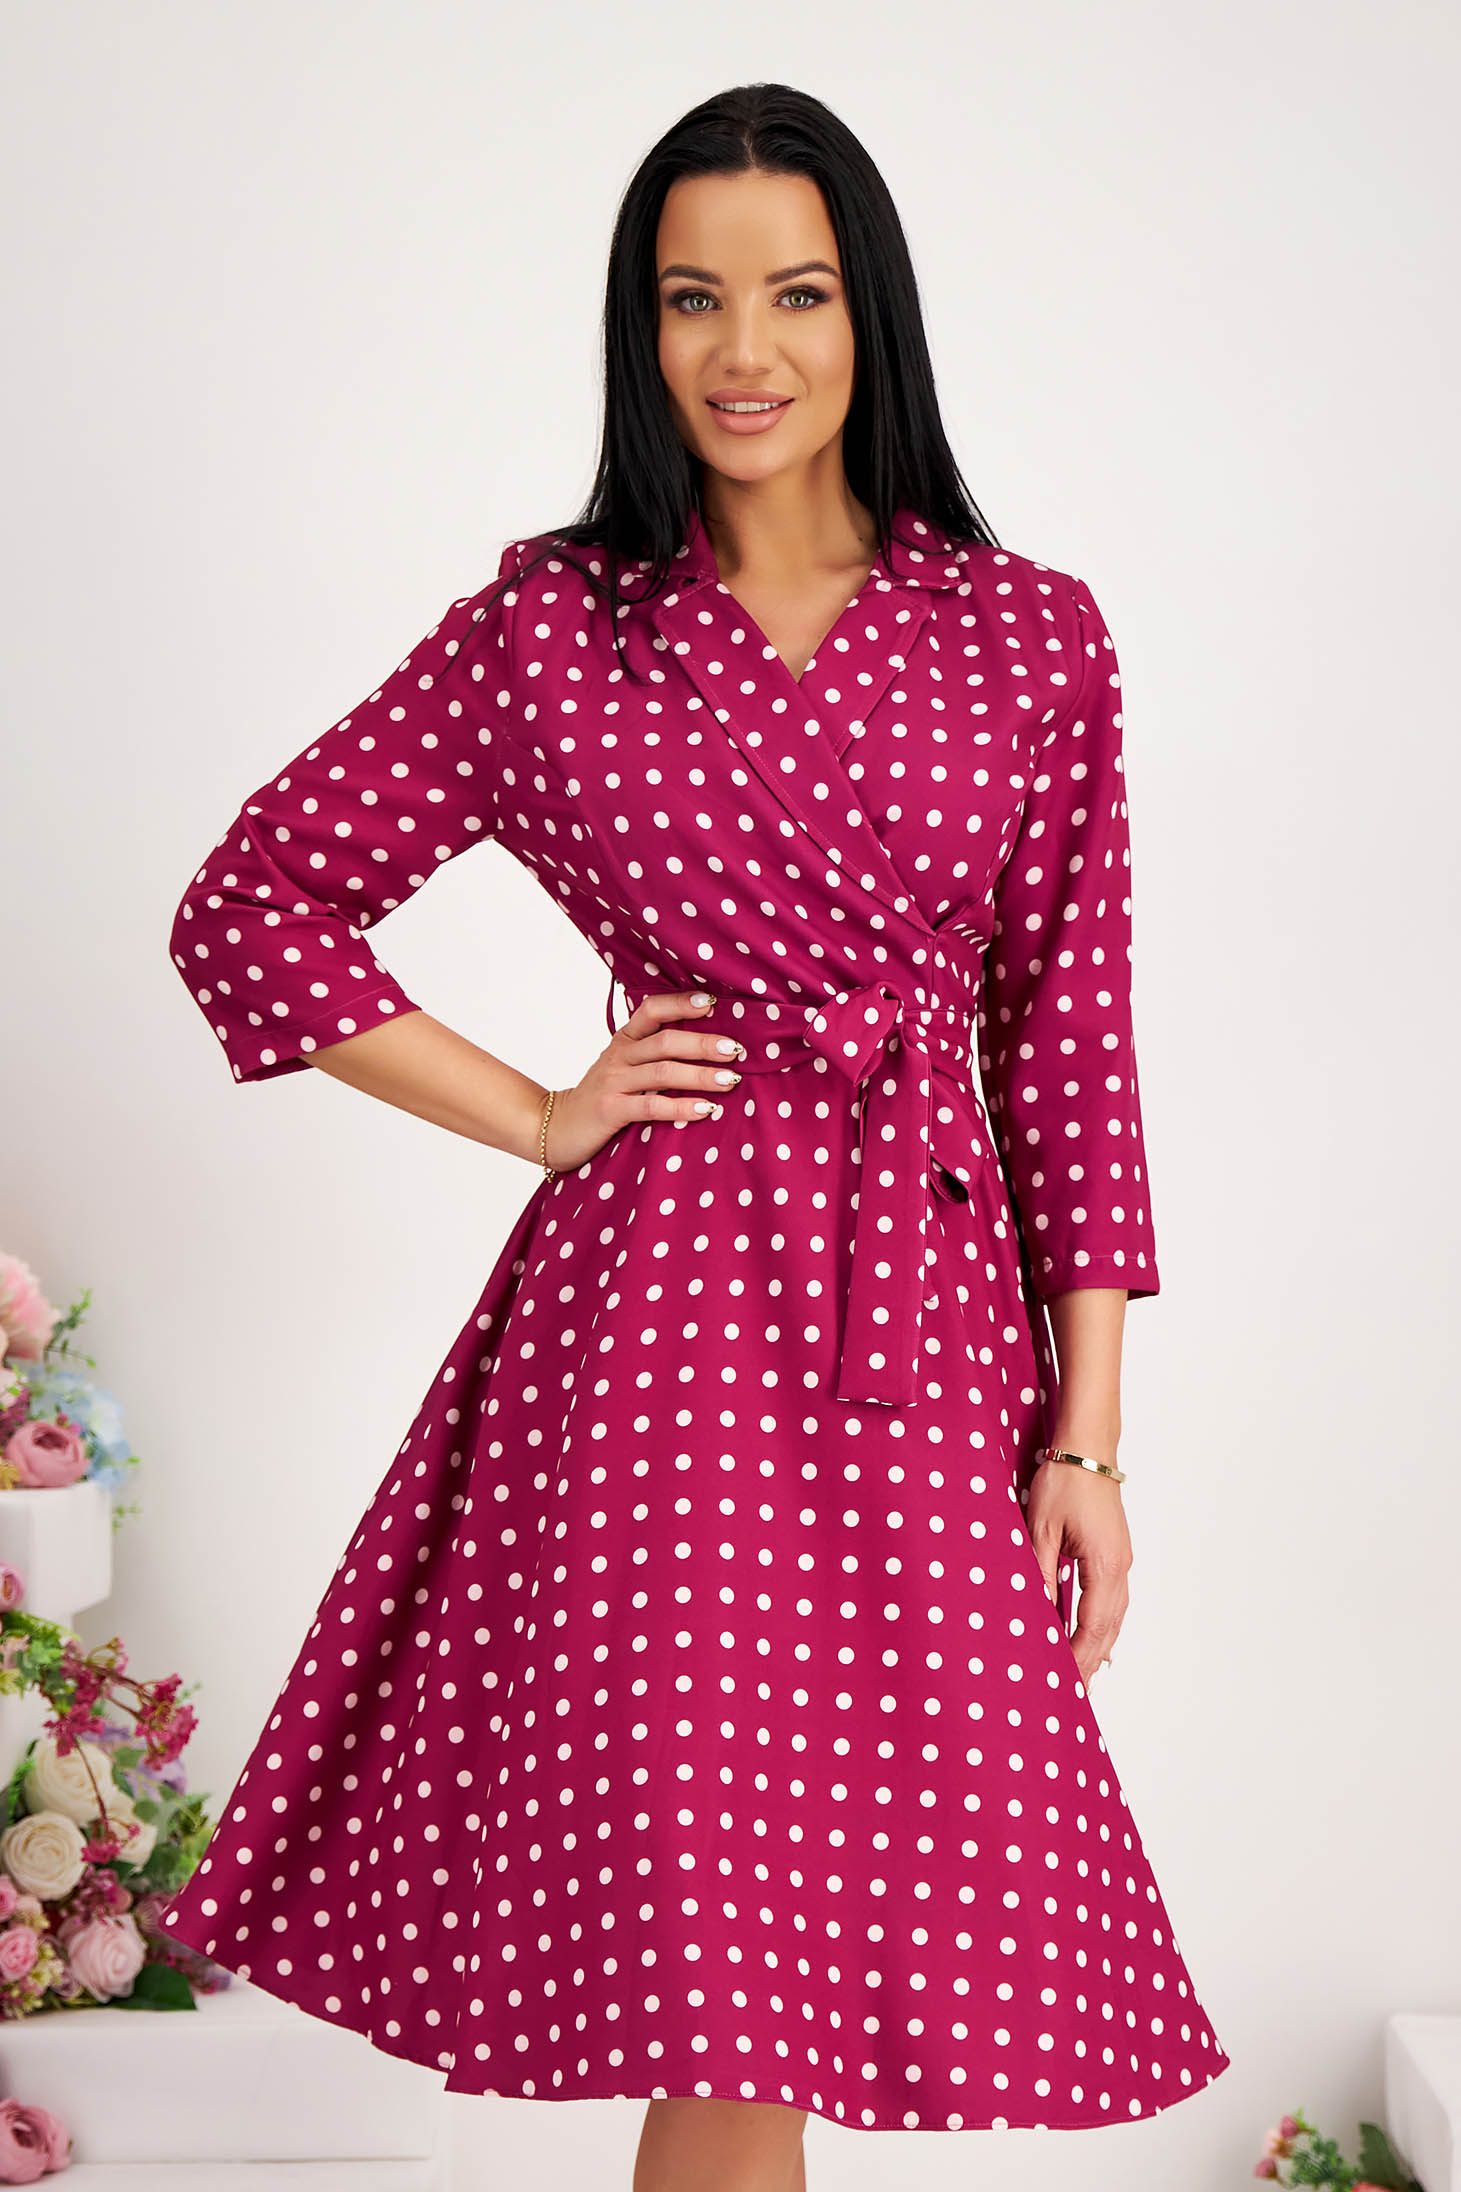 Midi dress made of stretchy fabric with a flared design, side pockets, and crossover neckline